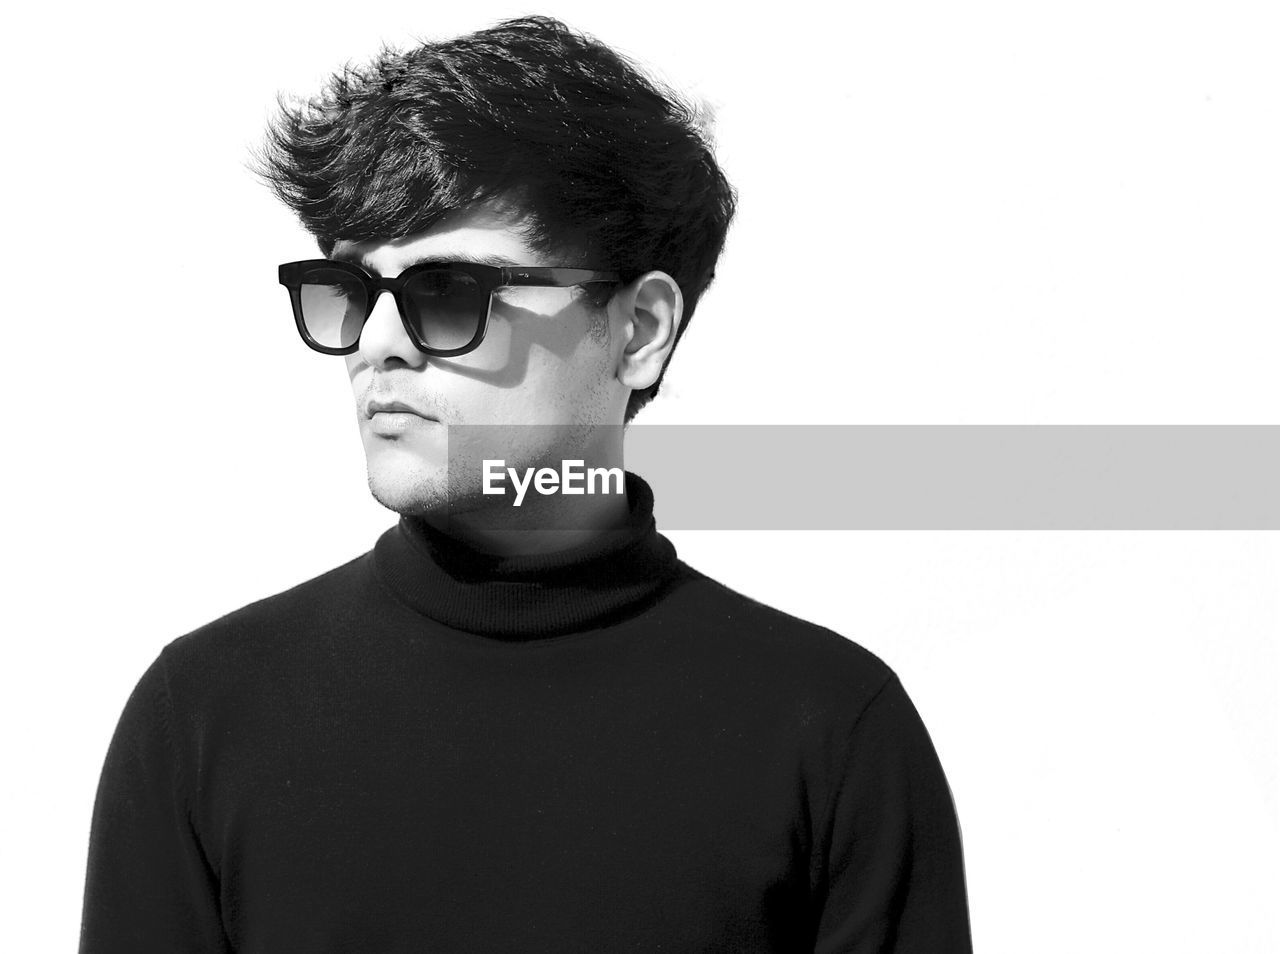 glasses, black, eyewear, one person, portrait, vision care, hairstyle, young adult, black and white, eyeglasses, fashion, studio shot, white background, headshot, moustache, casual clothing, indoors, men, cut out, human hair, t-shirt, adult, human face, sunglasses, looking, monochrome photography, front view, copy space, cool attitude, facial hair, serious, goggles, person, clothing, white, monochrome, looking away, contemplation